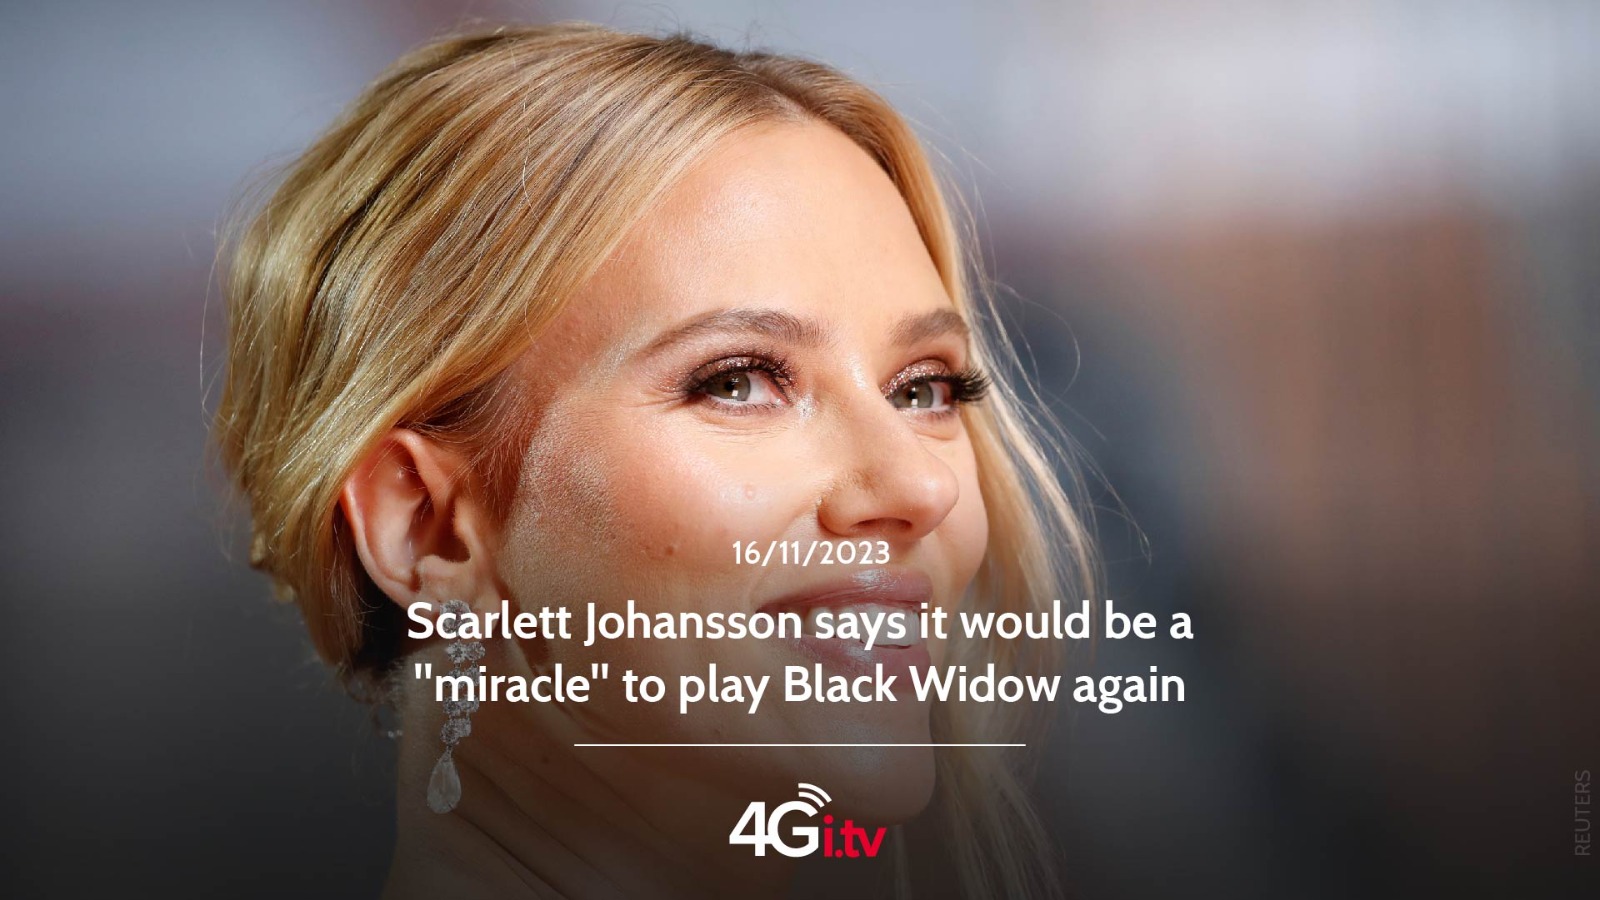 Подробнее о статье Scarlett Johansson says it would be a “miracle” to play Black Widow again